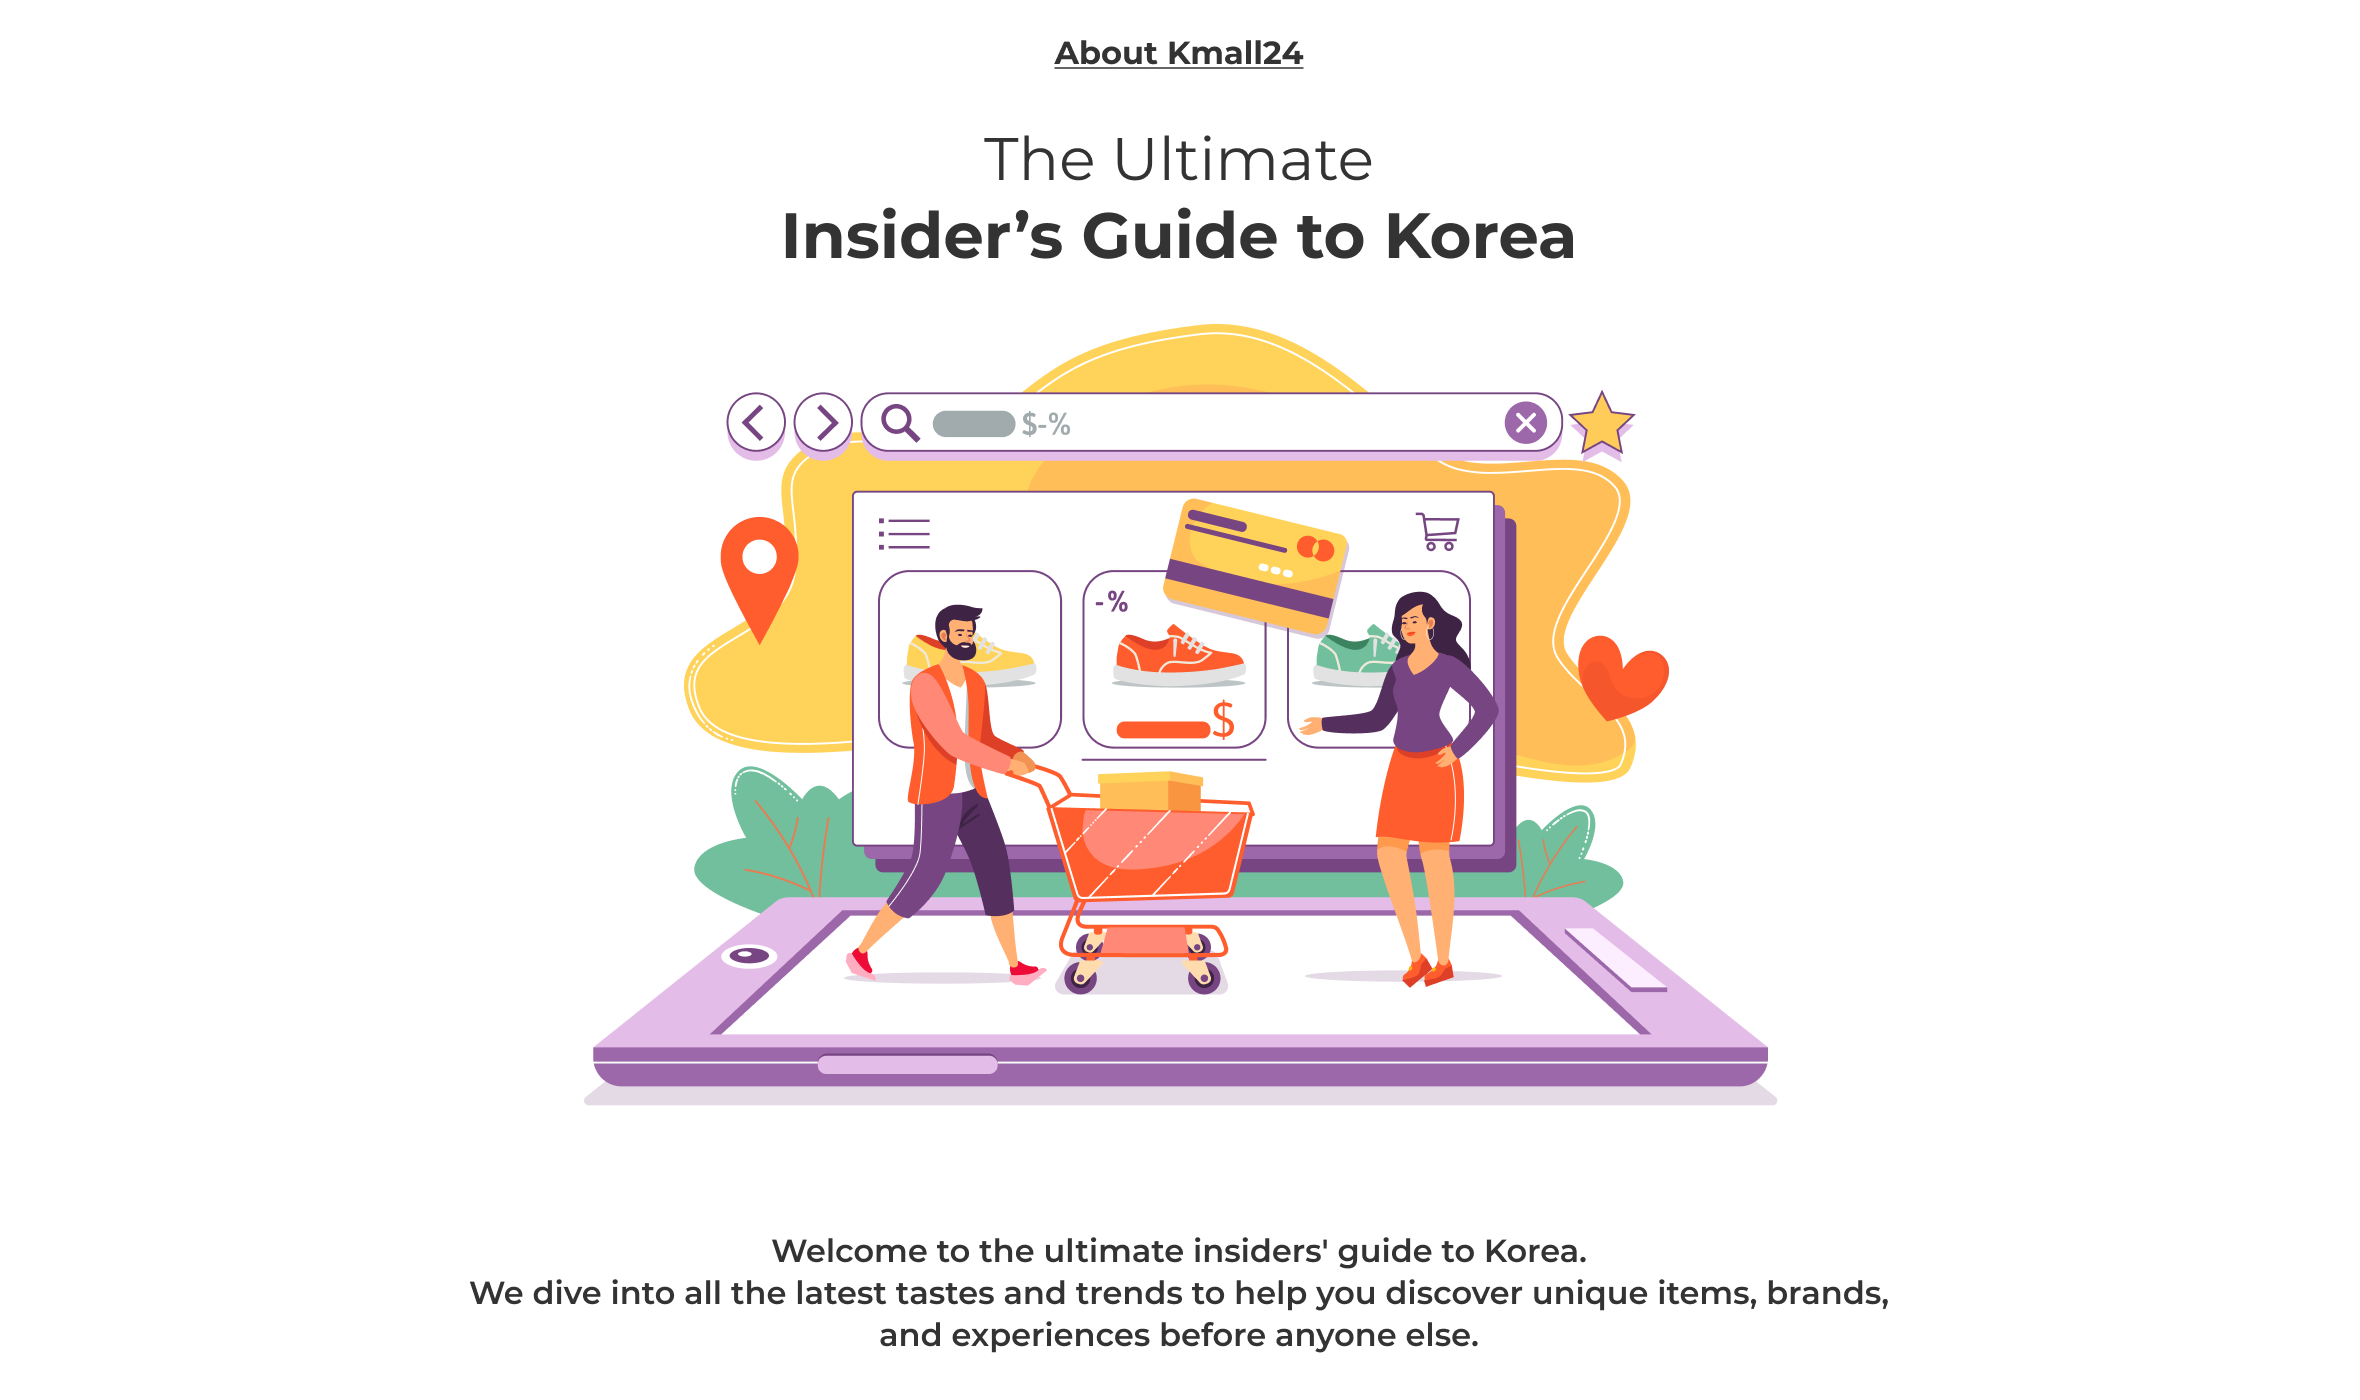 About kmall24 The Ultimate Insider's Guide to Korea